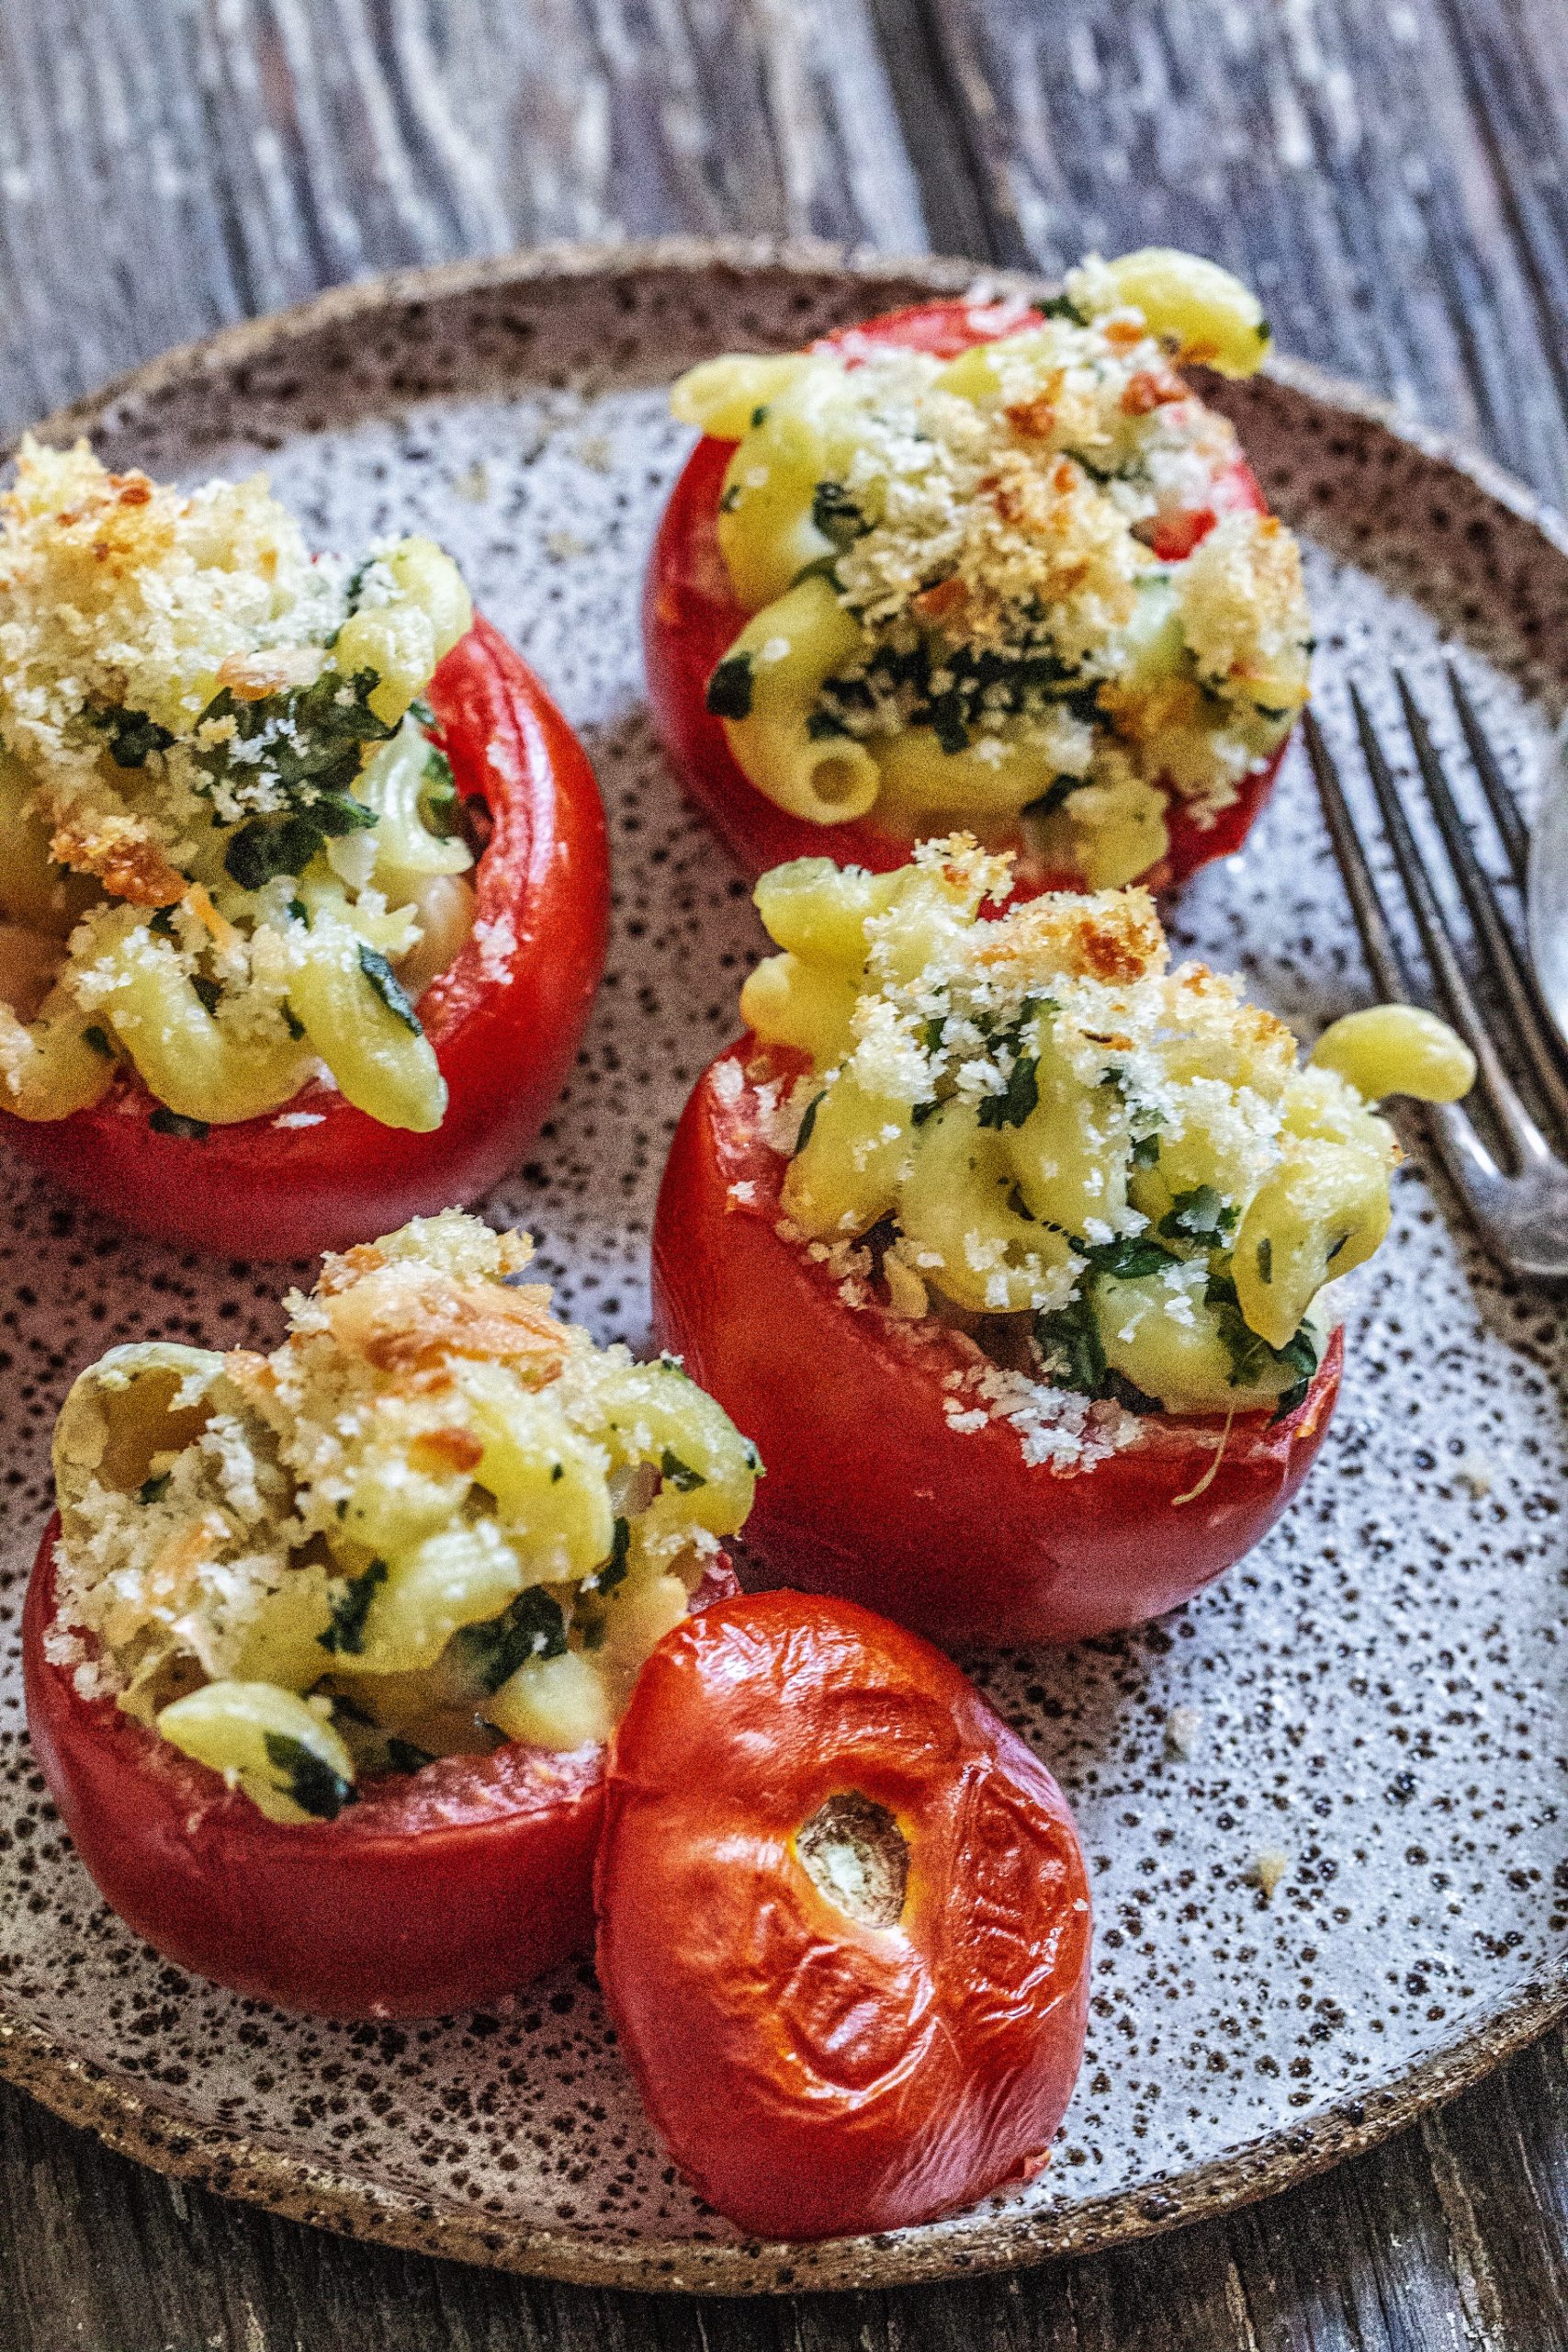 Spinach and Artichoke Mac and Cheese-Stuffed Tomatoes